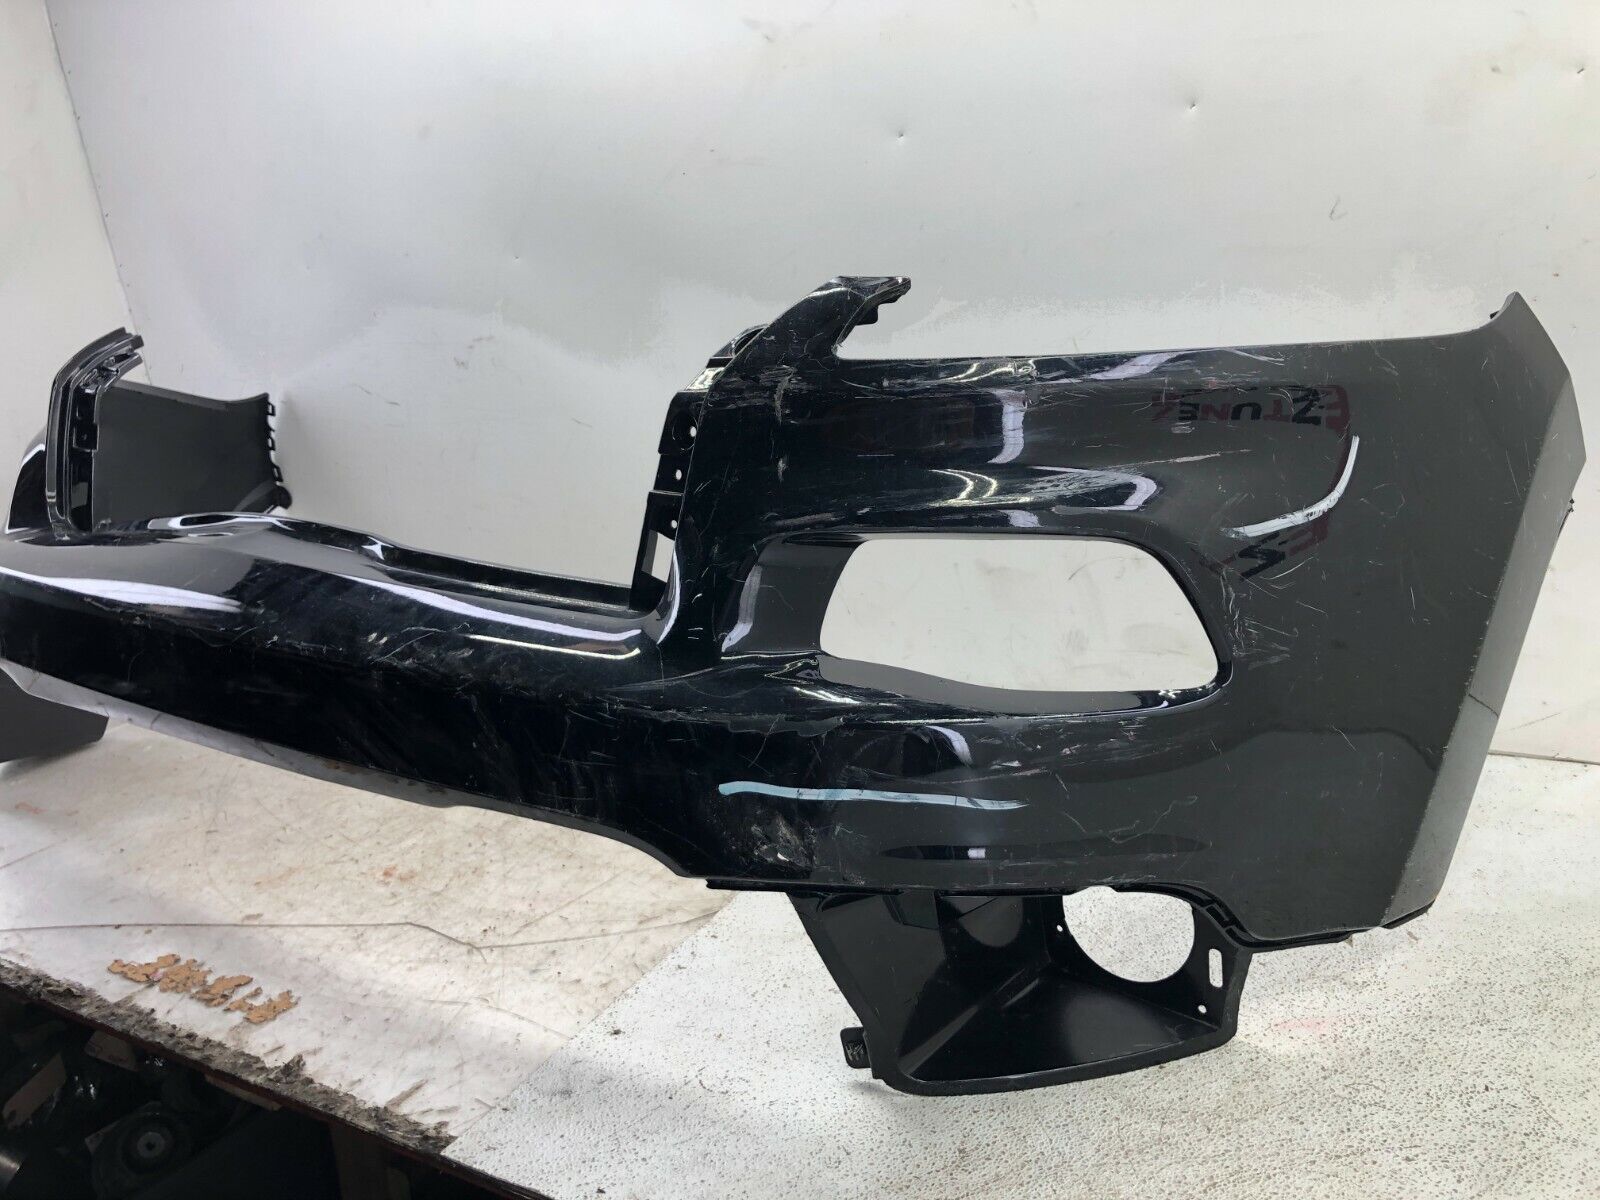 Used 2014-2018 Jeep Grand Cherokee Front Bumper Cover Oem for Sale | 5NJ52TRMAA 5NJ55TRMAA 2018 Jeep Grand Cherokee Front Bumper Parts